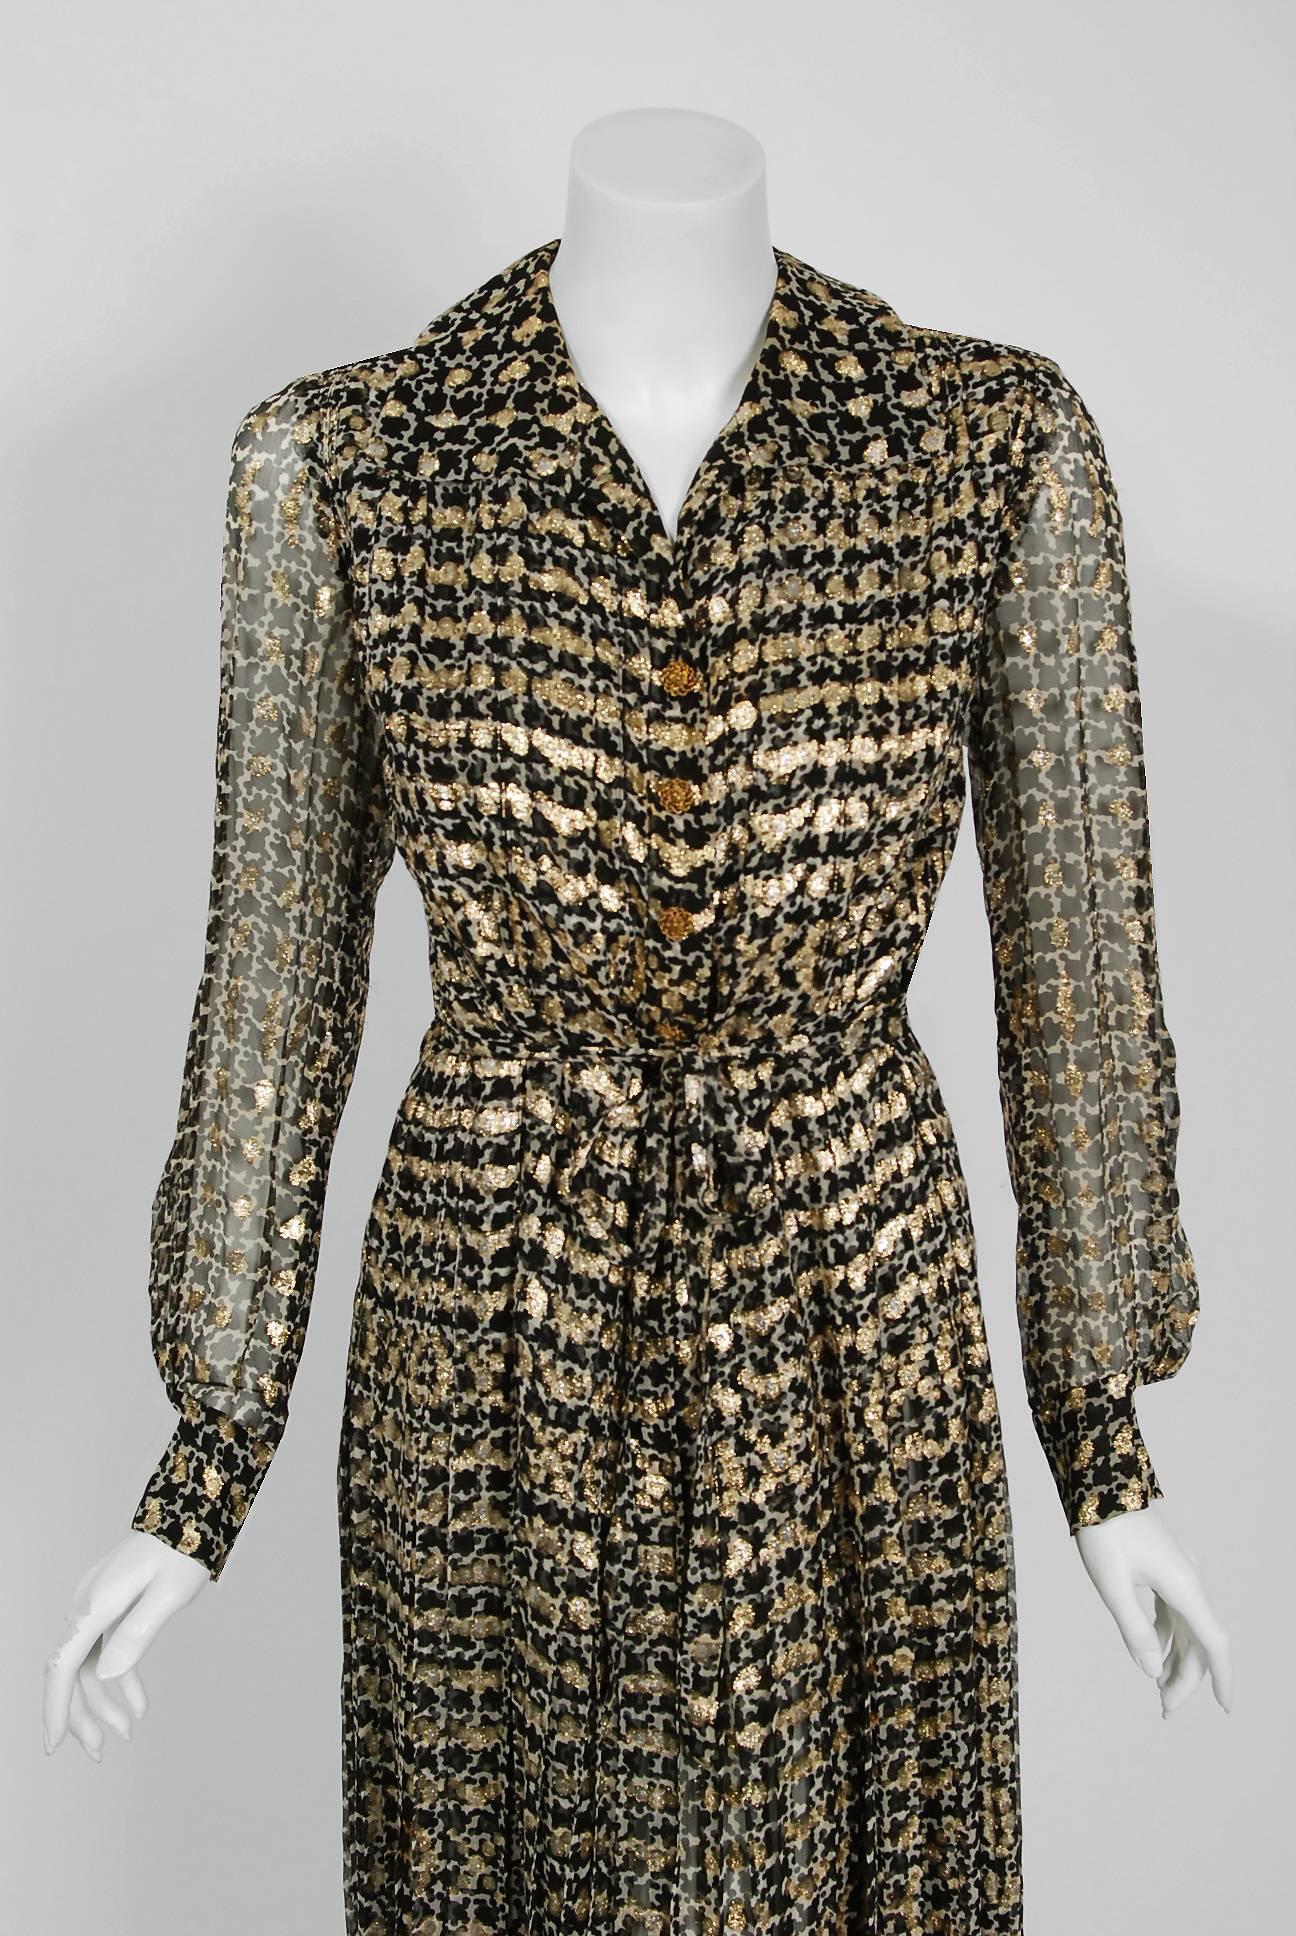 Chanel is known to be one of the most luxurious and decadent fashion houses in the world. This breathtaking metallic-gold graphic black and white silk dress from her 1975 Fall/Winter collection is a perfect example of why this couture brand has